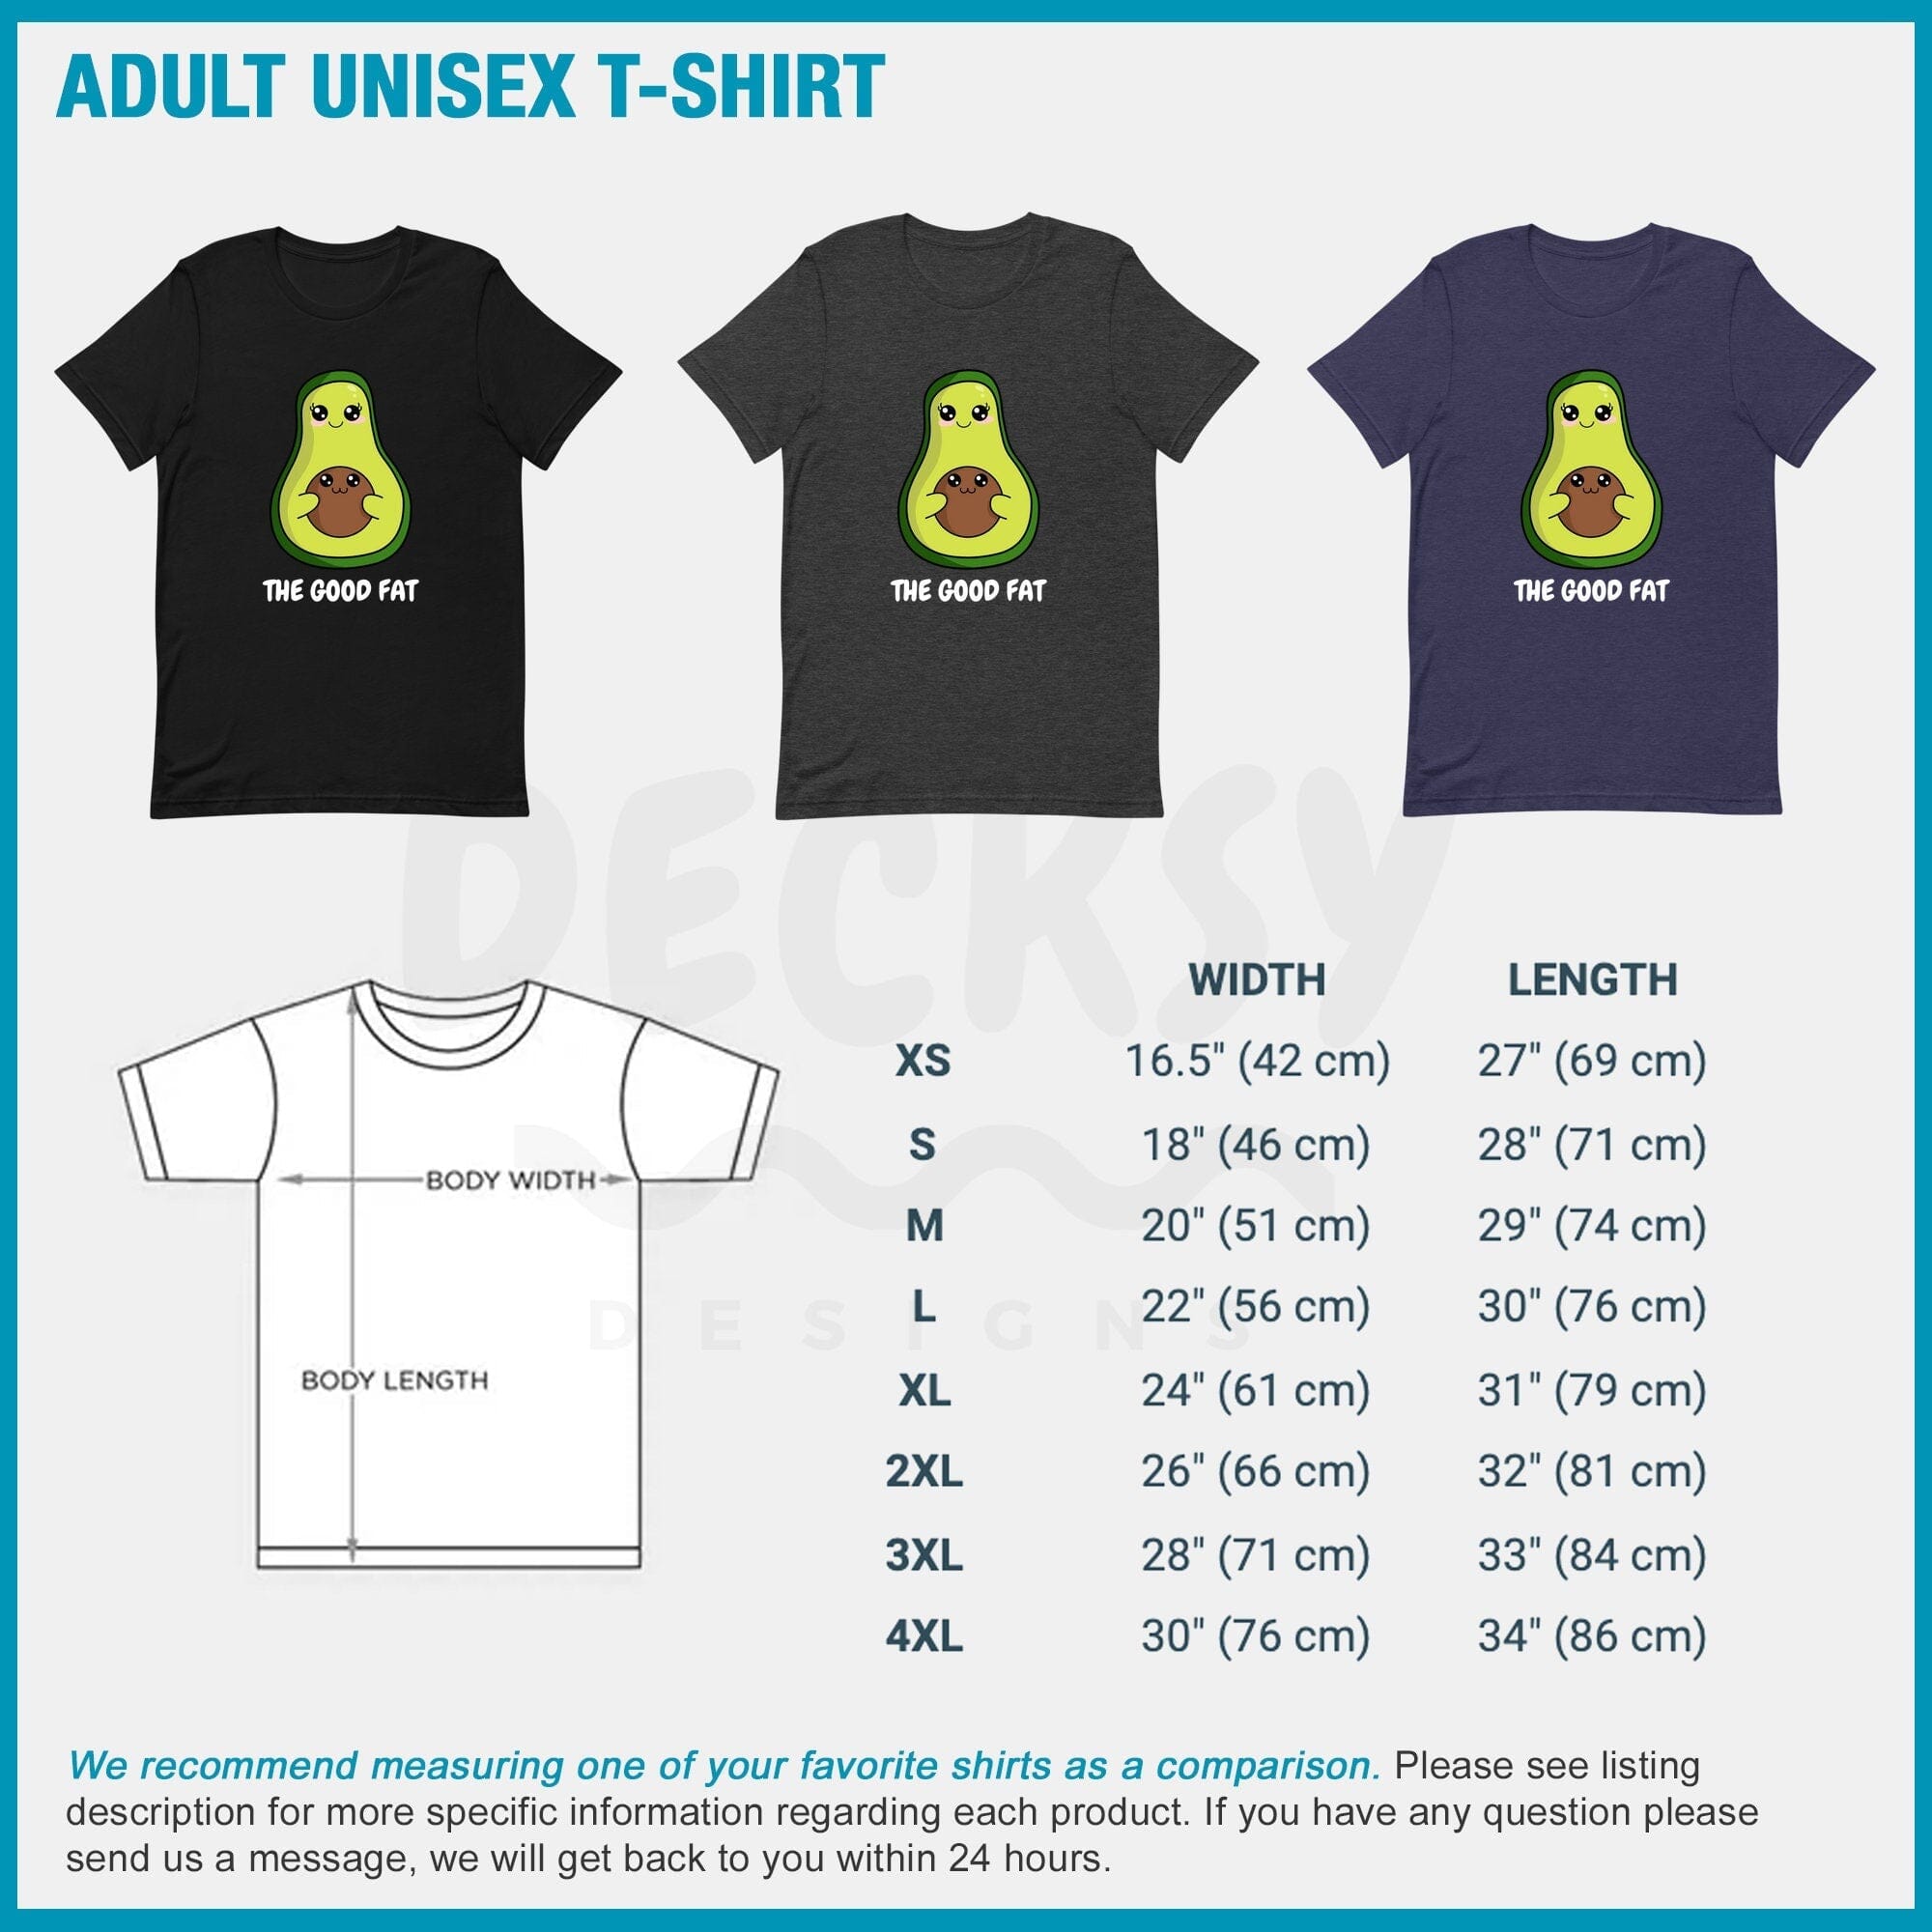 Avocado Pregnancy Reveal Shirt, Gift For Mom To Be-Clothing:Gender-Neutral Adult Clothing:Tops & Tees:T-shirts:Graphic Tees-DecksyDesigns